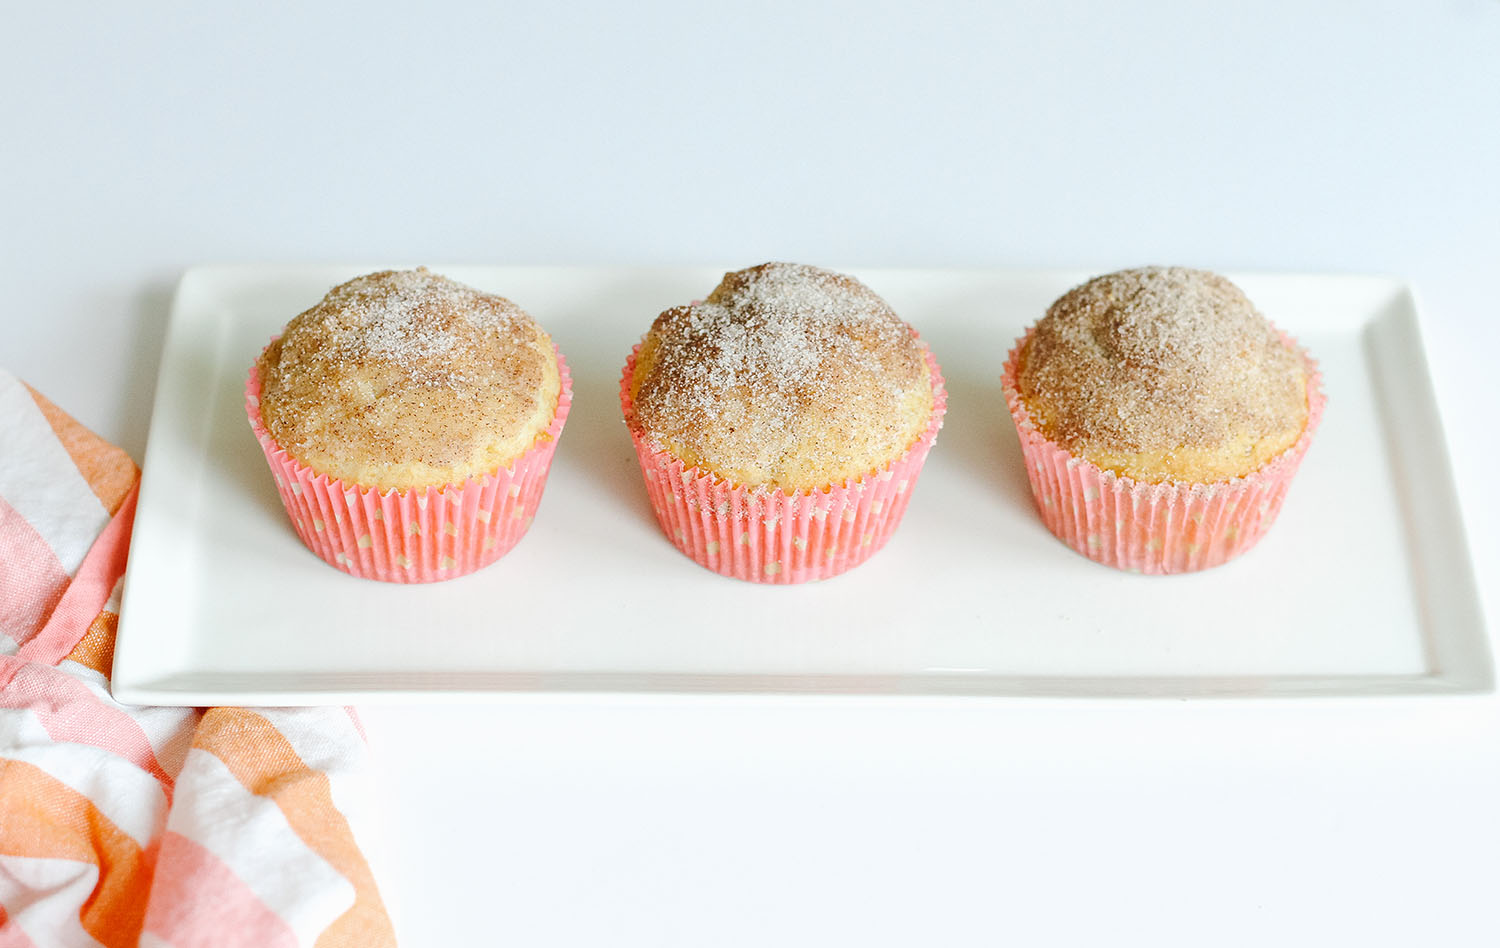 Old Fashioned Donut Muffins Recipe featured by US lifestyle blogger, By Jen Jurca